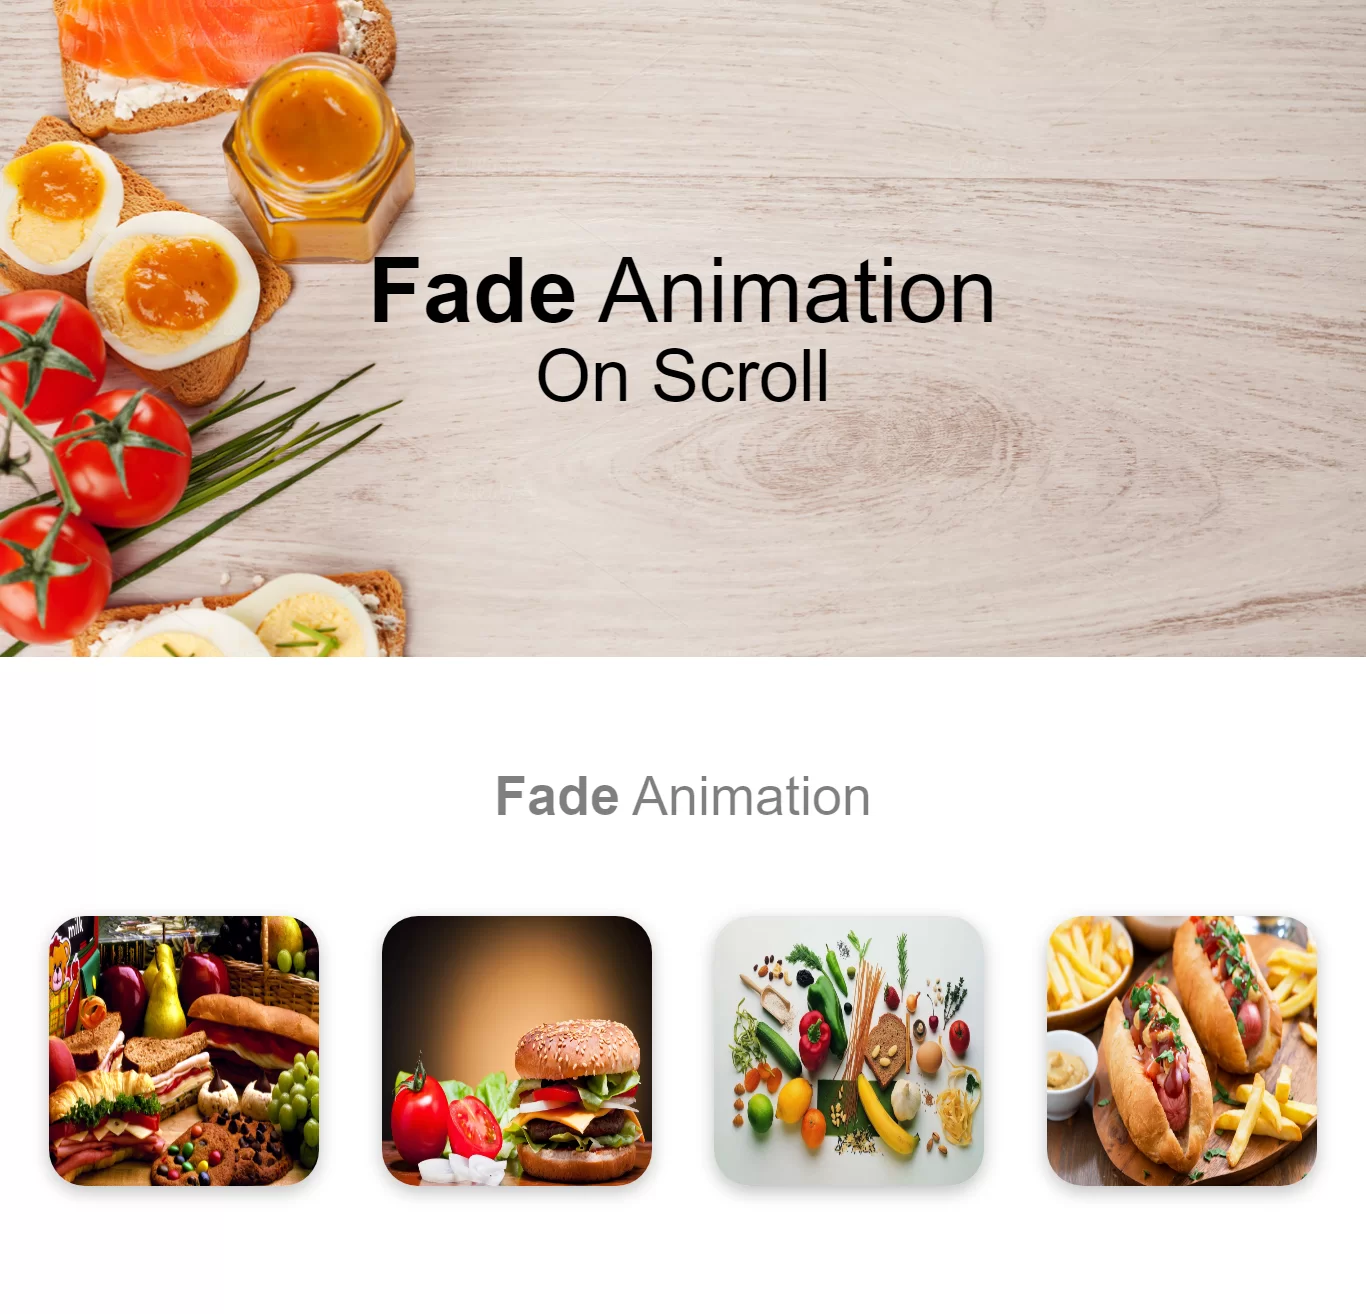 How Do I Create Fade Animation On Scroll Using CSS